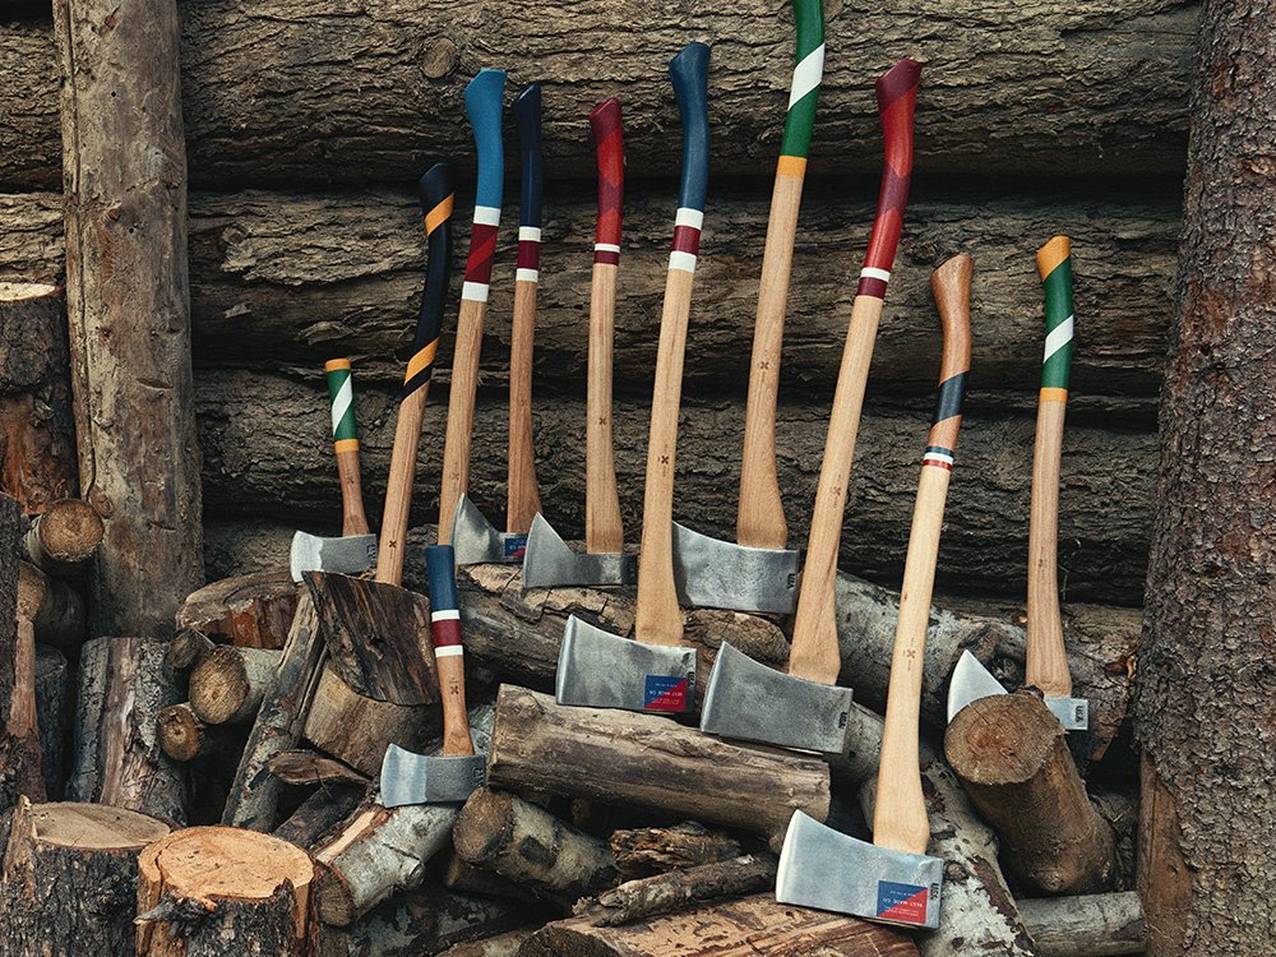 A collection of Best Made axes and hatches lean on a pile of cut wood against a log cabin